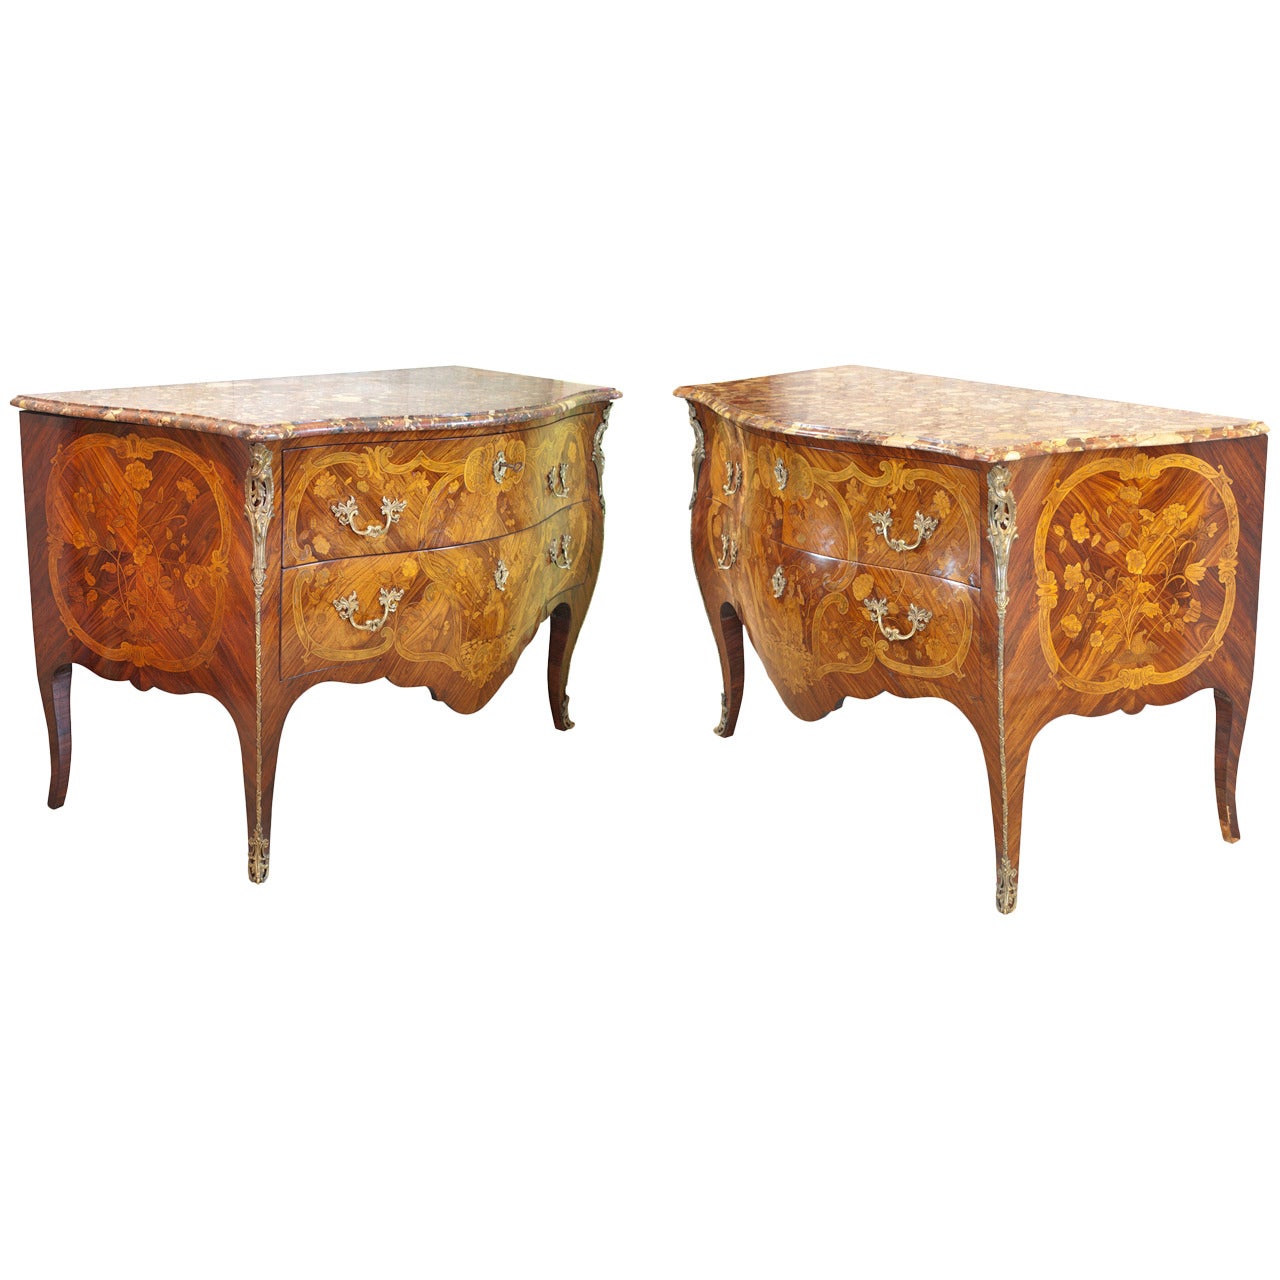 Pair of 18th Century Portuguese Commodes For Sale